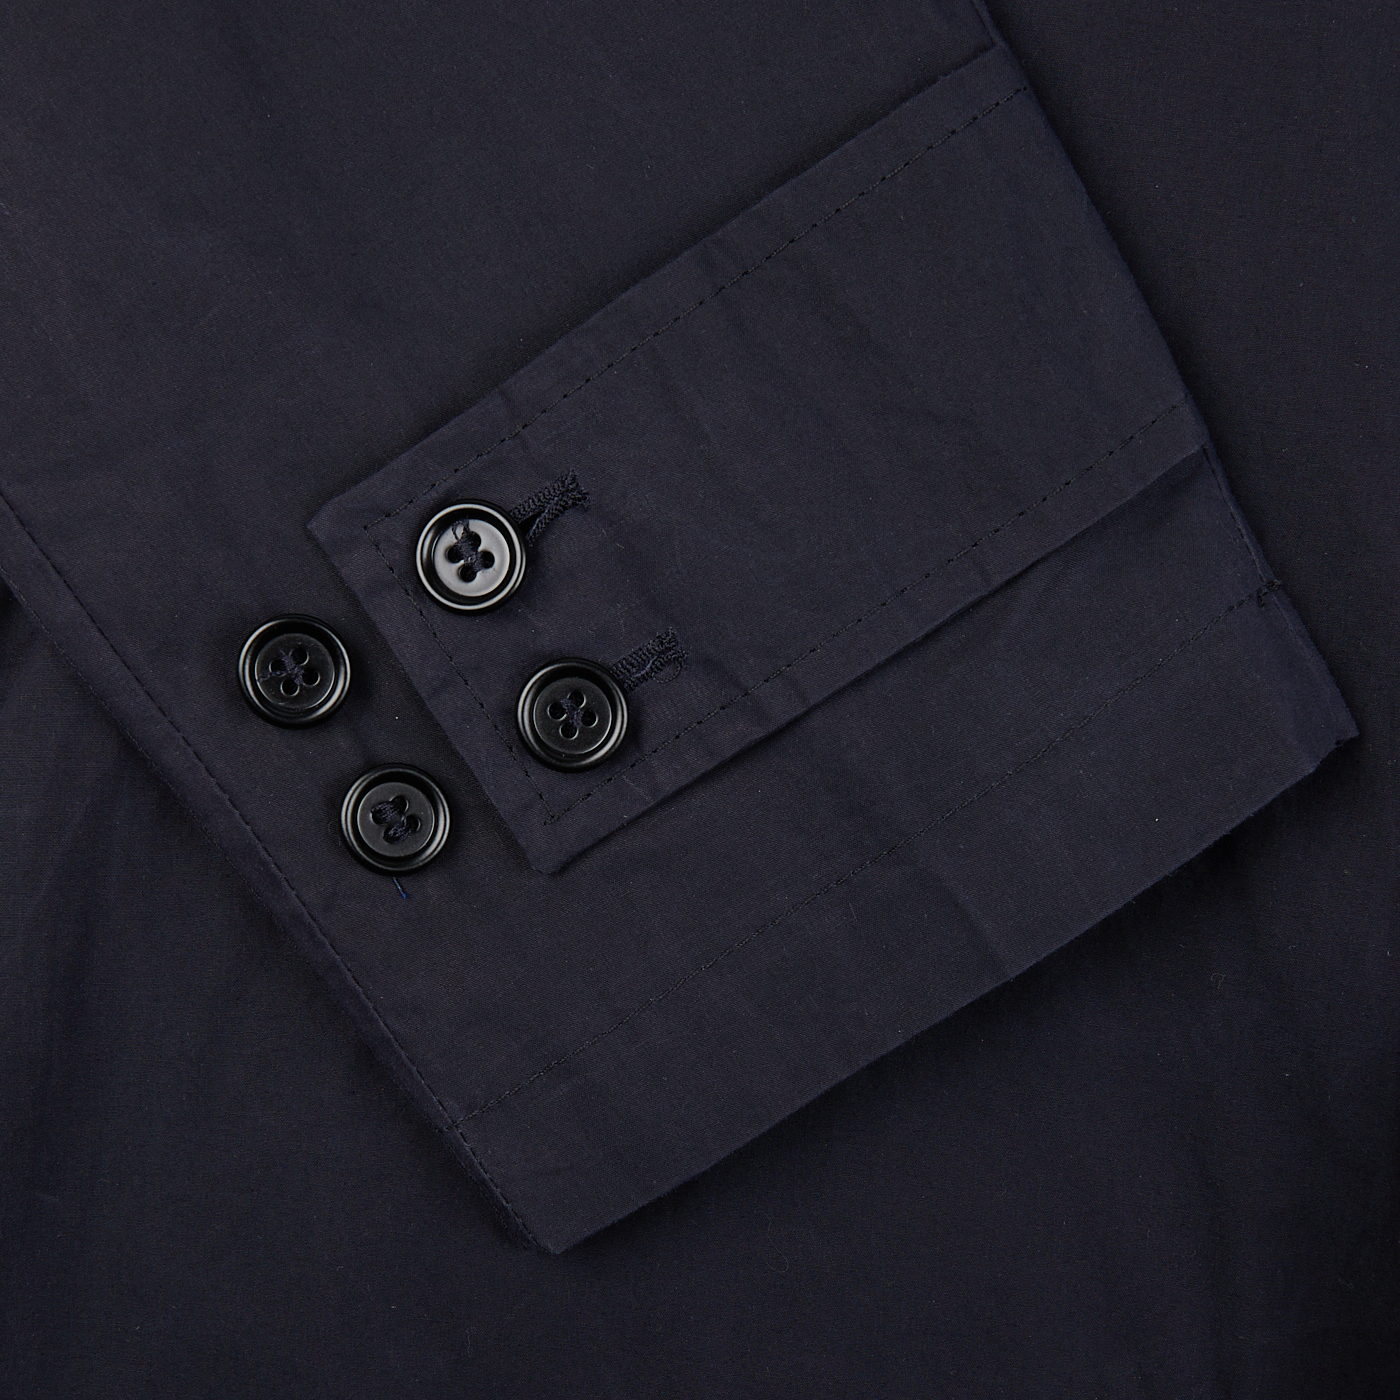 A close up image of L'Impermeabile Navy Blue Waxed Cotton Kamikaze Trenchcoat with buttons.